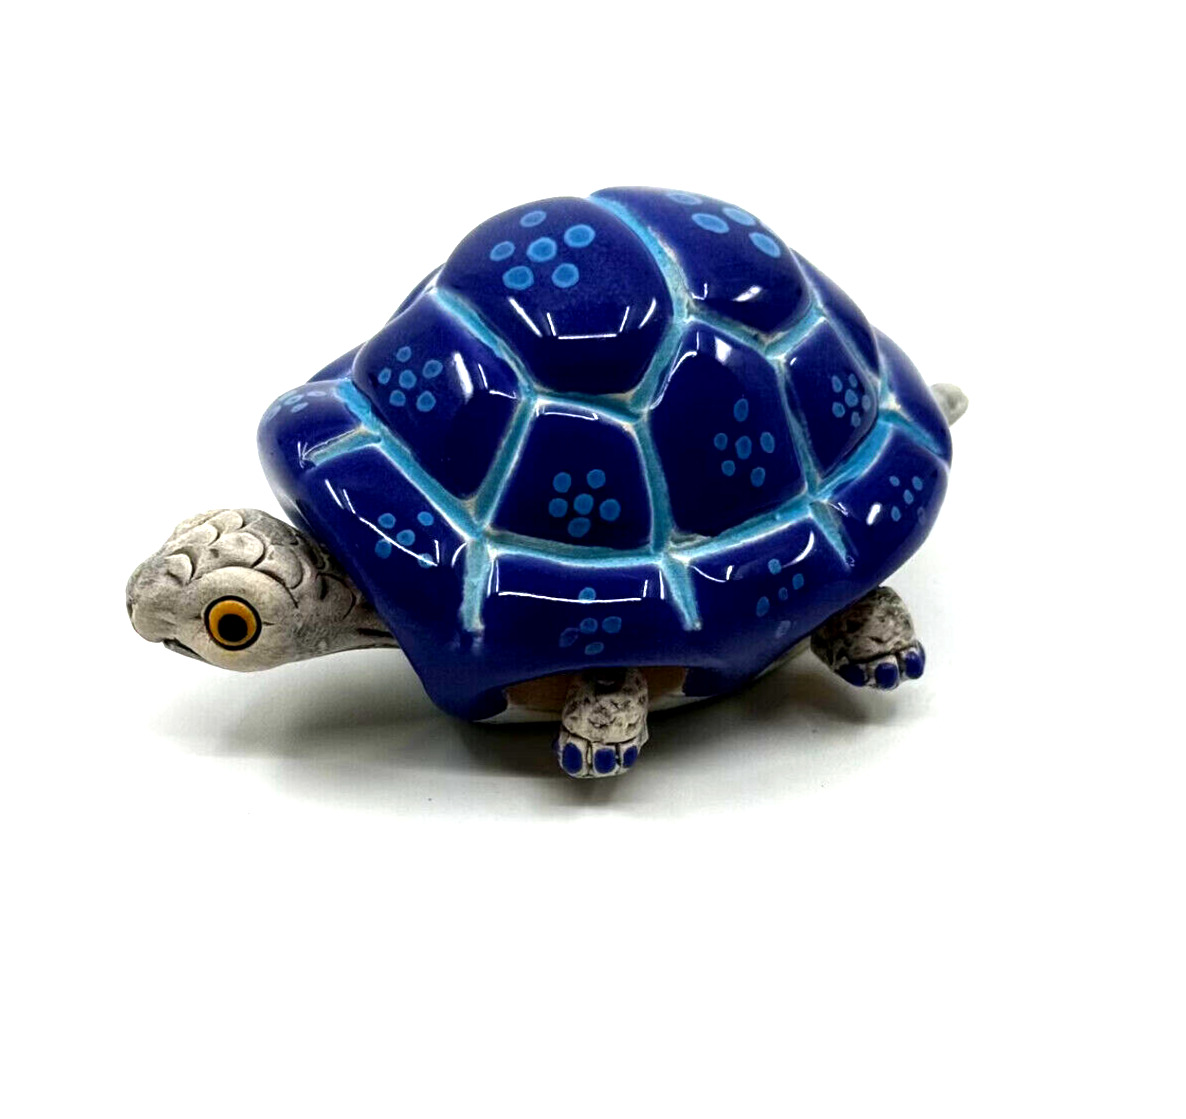 Vintage Ceramic Wiggling Turtle Royal with Blue Daisies New Old Stock LEPS Peru